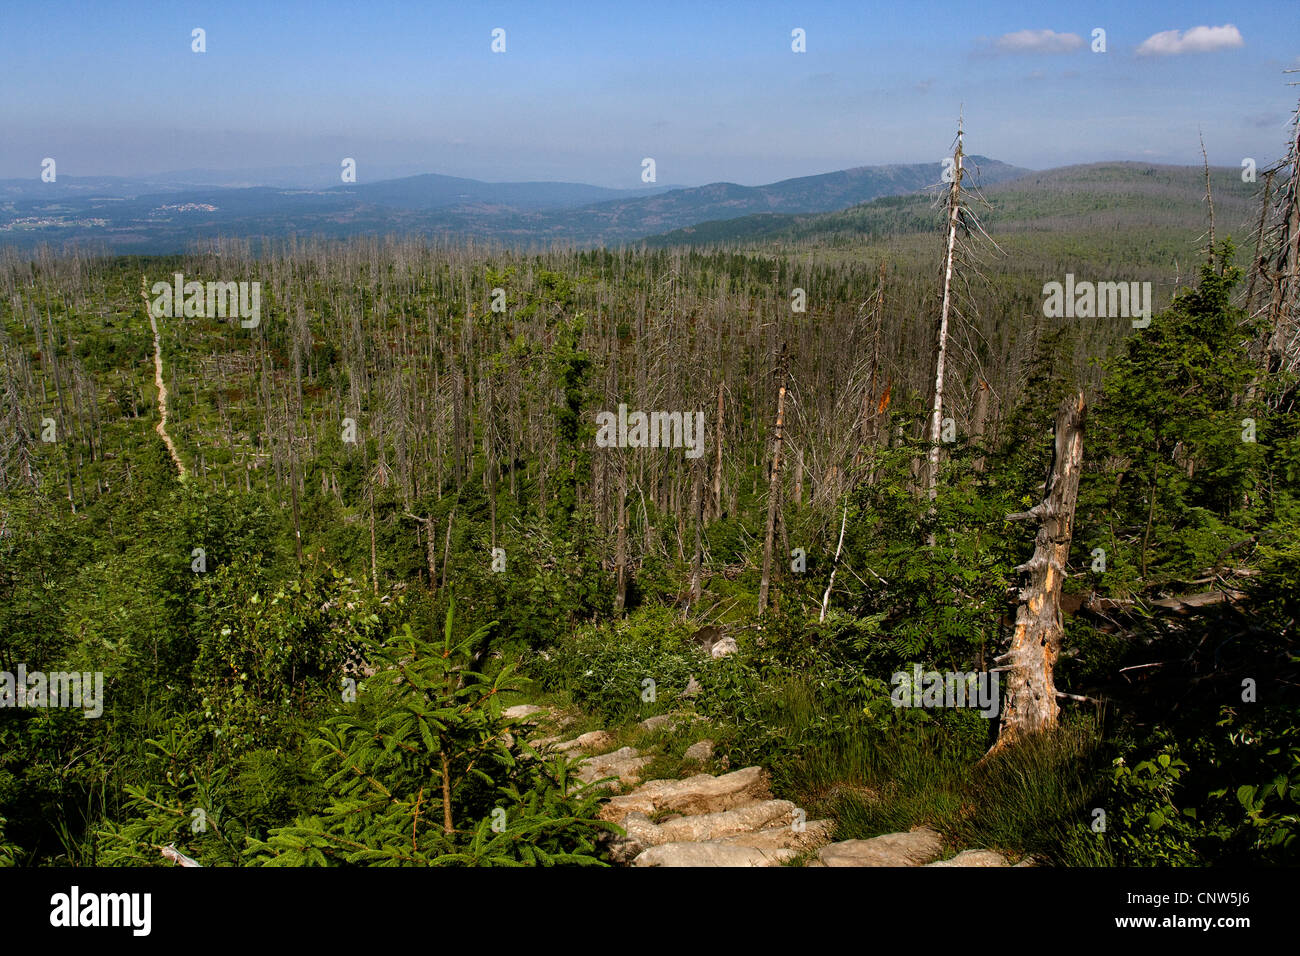 Norway spruce (Picea abies), forest dieback at Lusen in National Park Bavarian Forest, Germany, Bavaria, Bavarian Forest National Park Stock Photo